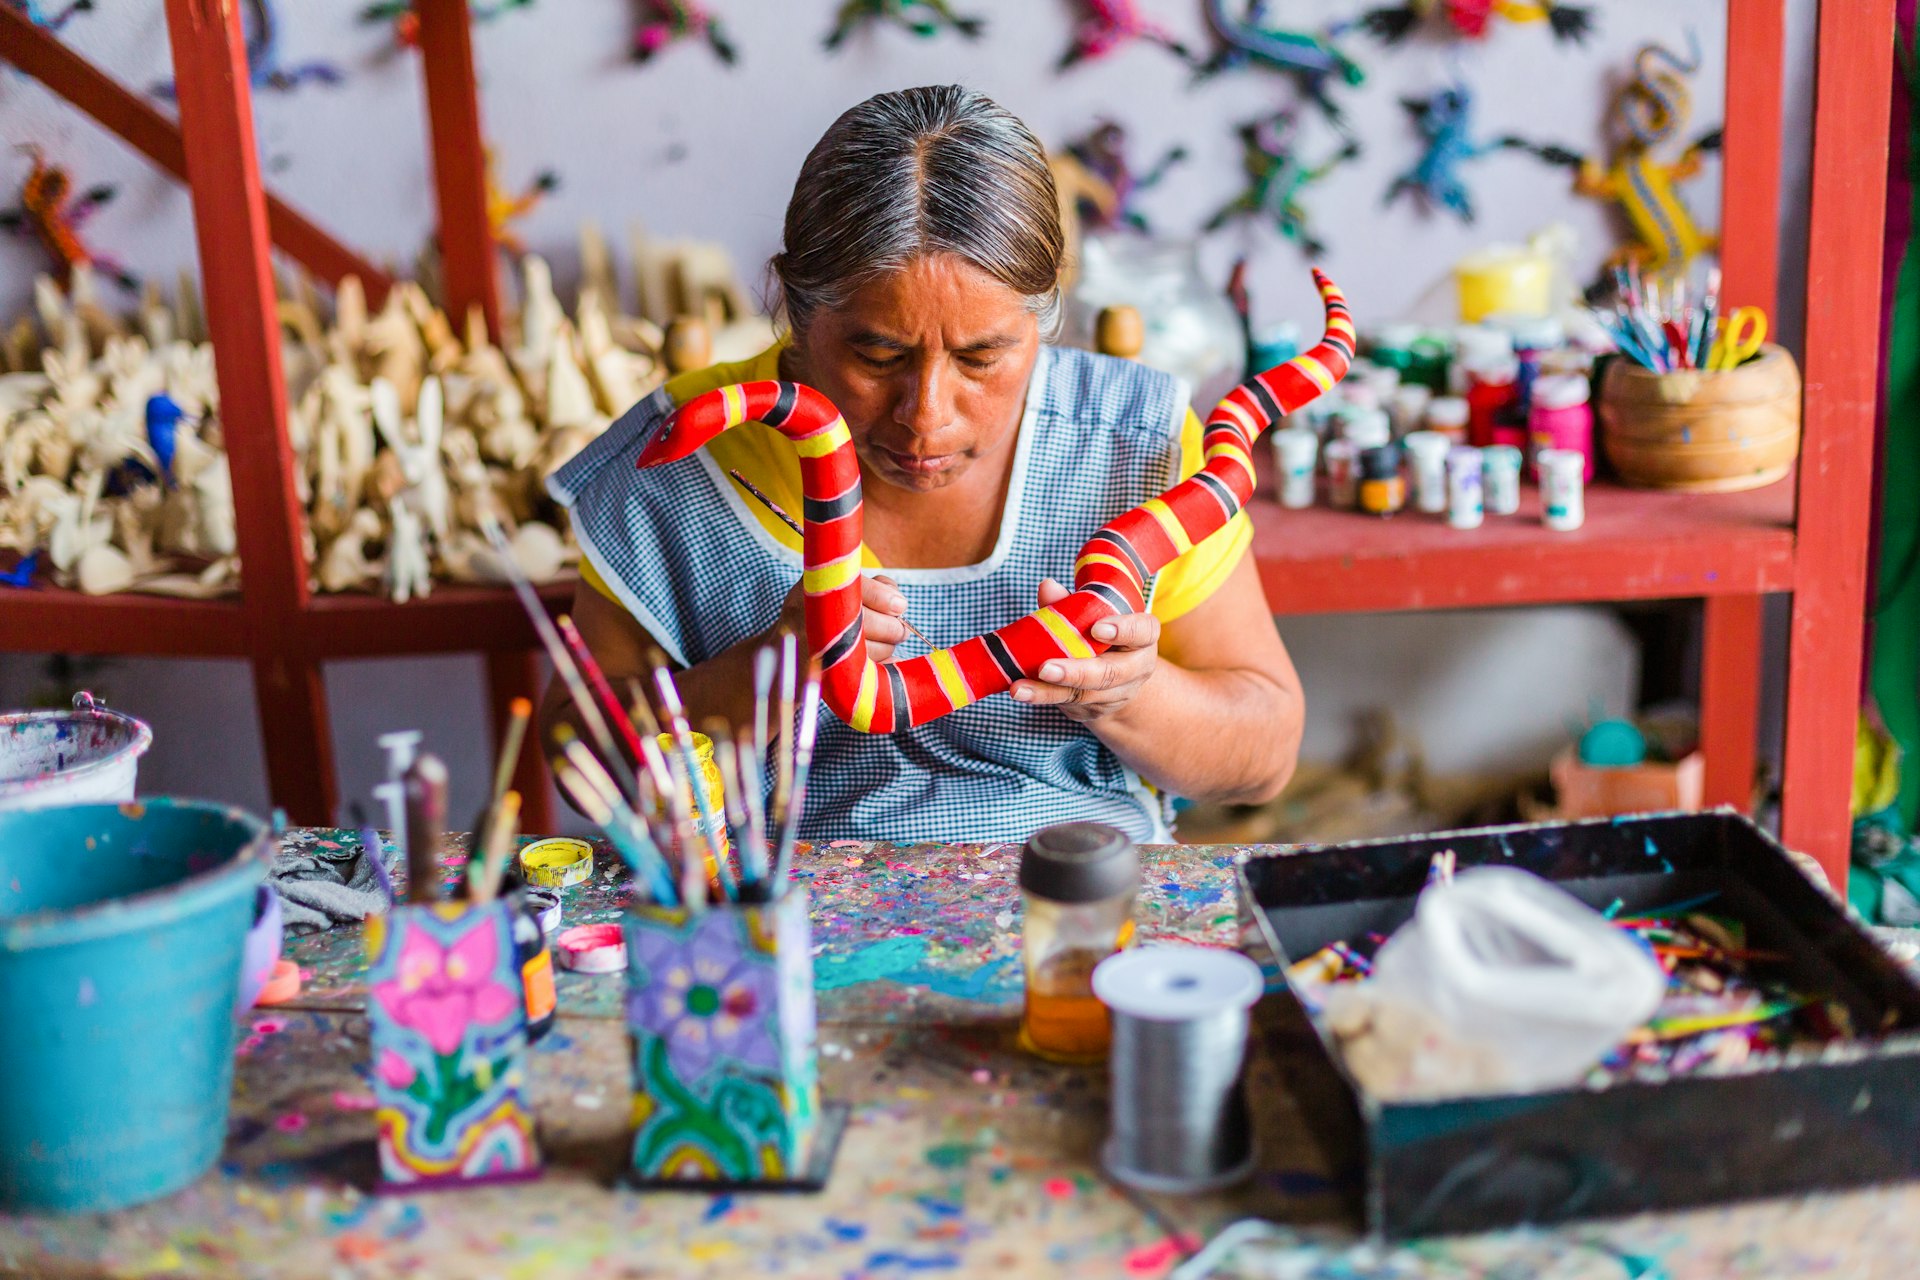 An artist paints a colorful carved-wood alebrije sculpture in a studio in San Martin Tilcajete